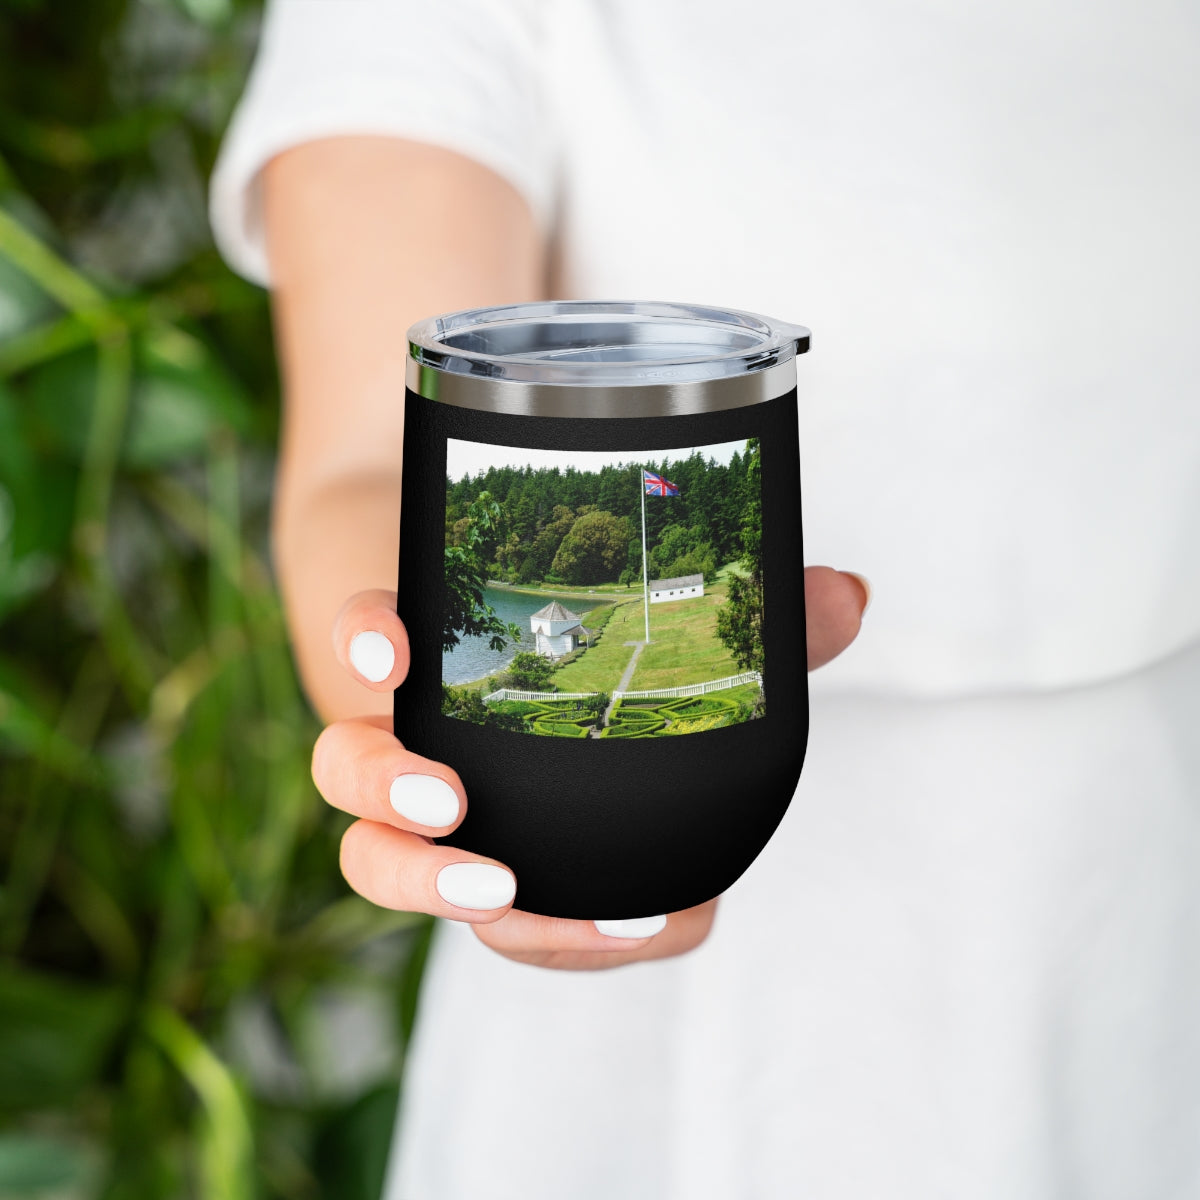 Magnificent Grandiose Views - 12 oz Insulated Wine Tumbler - Fry1Productions